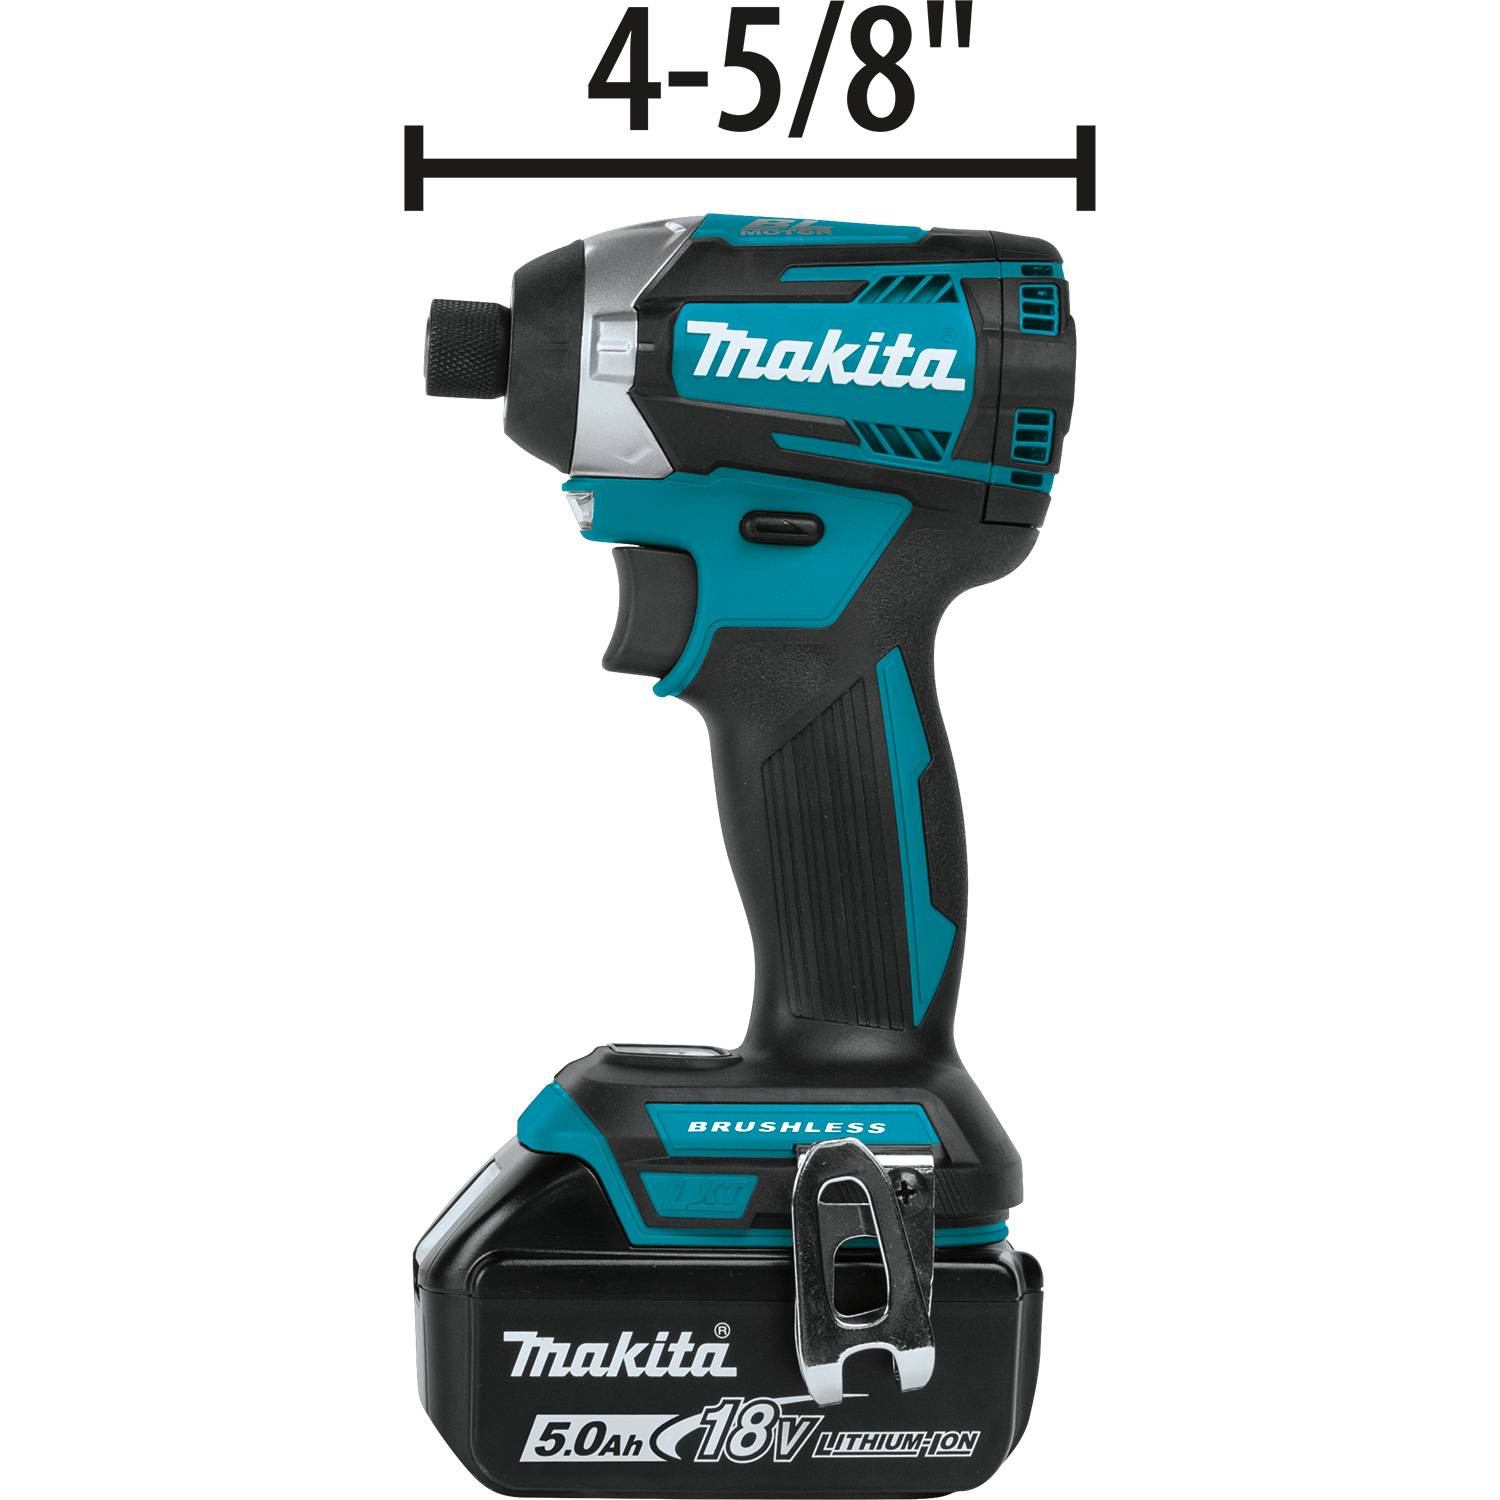 Makita 18V LXT Brushless Cordless Quick-Shift Mode 3-Speed Impact Driver Kit from Columbia Safety